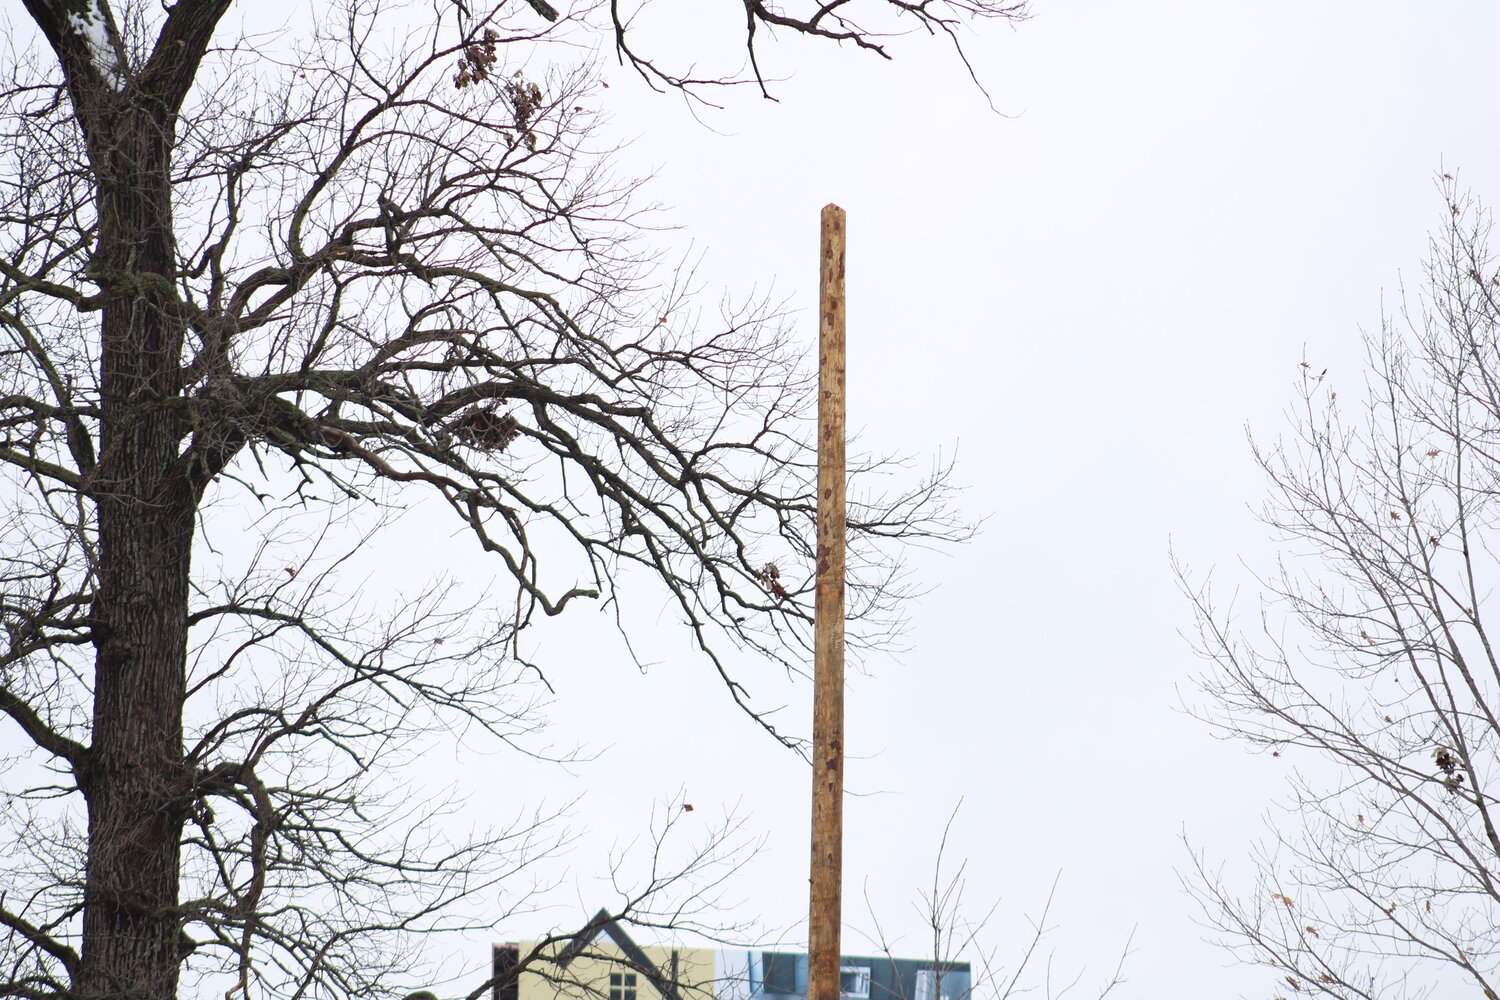 This is one of the new poles installed at Diekroeger Park in Wright City that will house the new permanent lighting for the park.